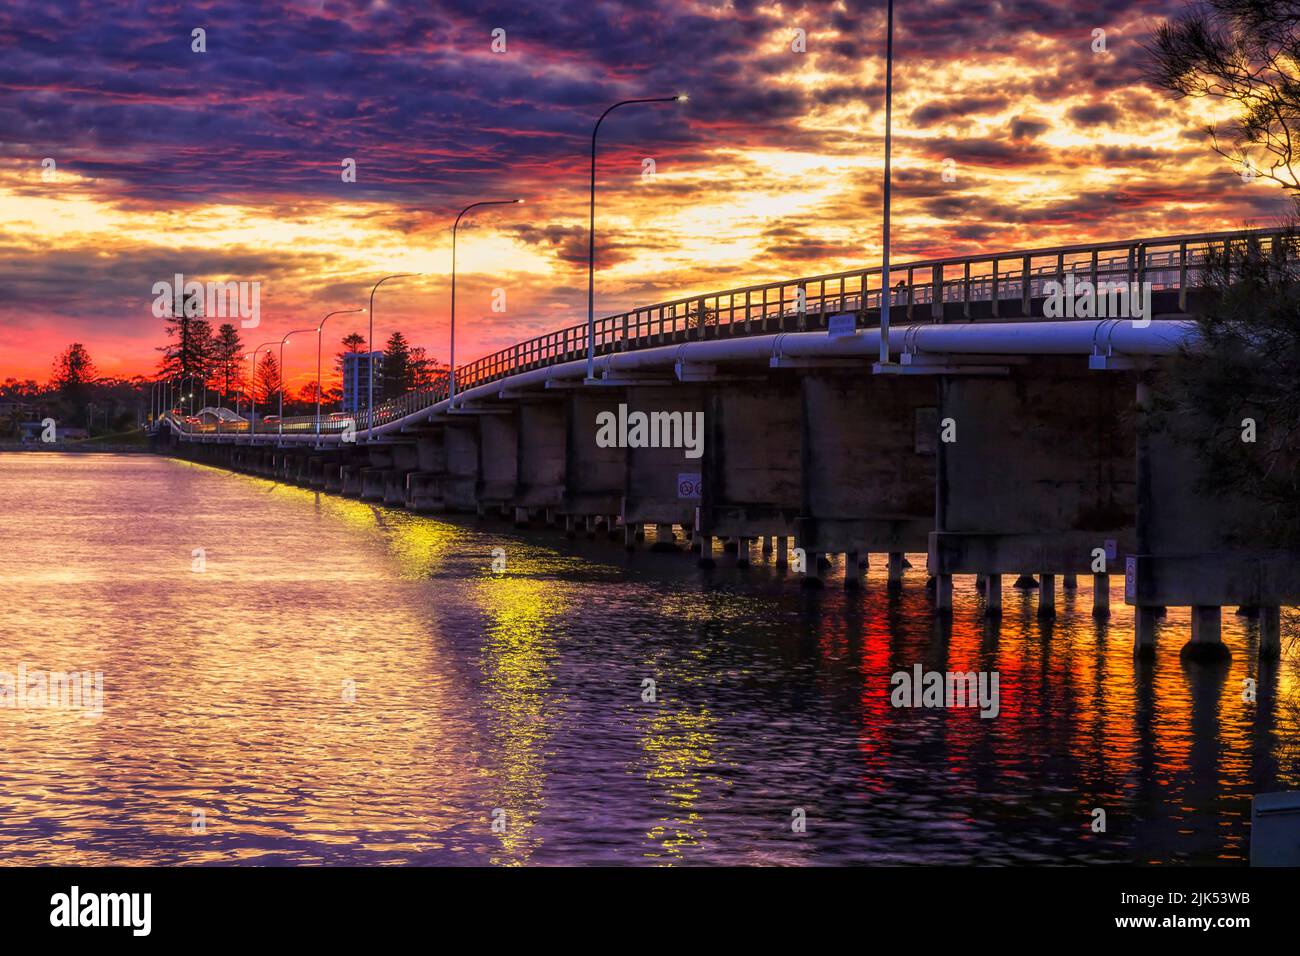 Head Street bridge across Coolongolook river on Wallis lake between Forster and Tuncurry towns at sunset. Stock Photo